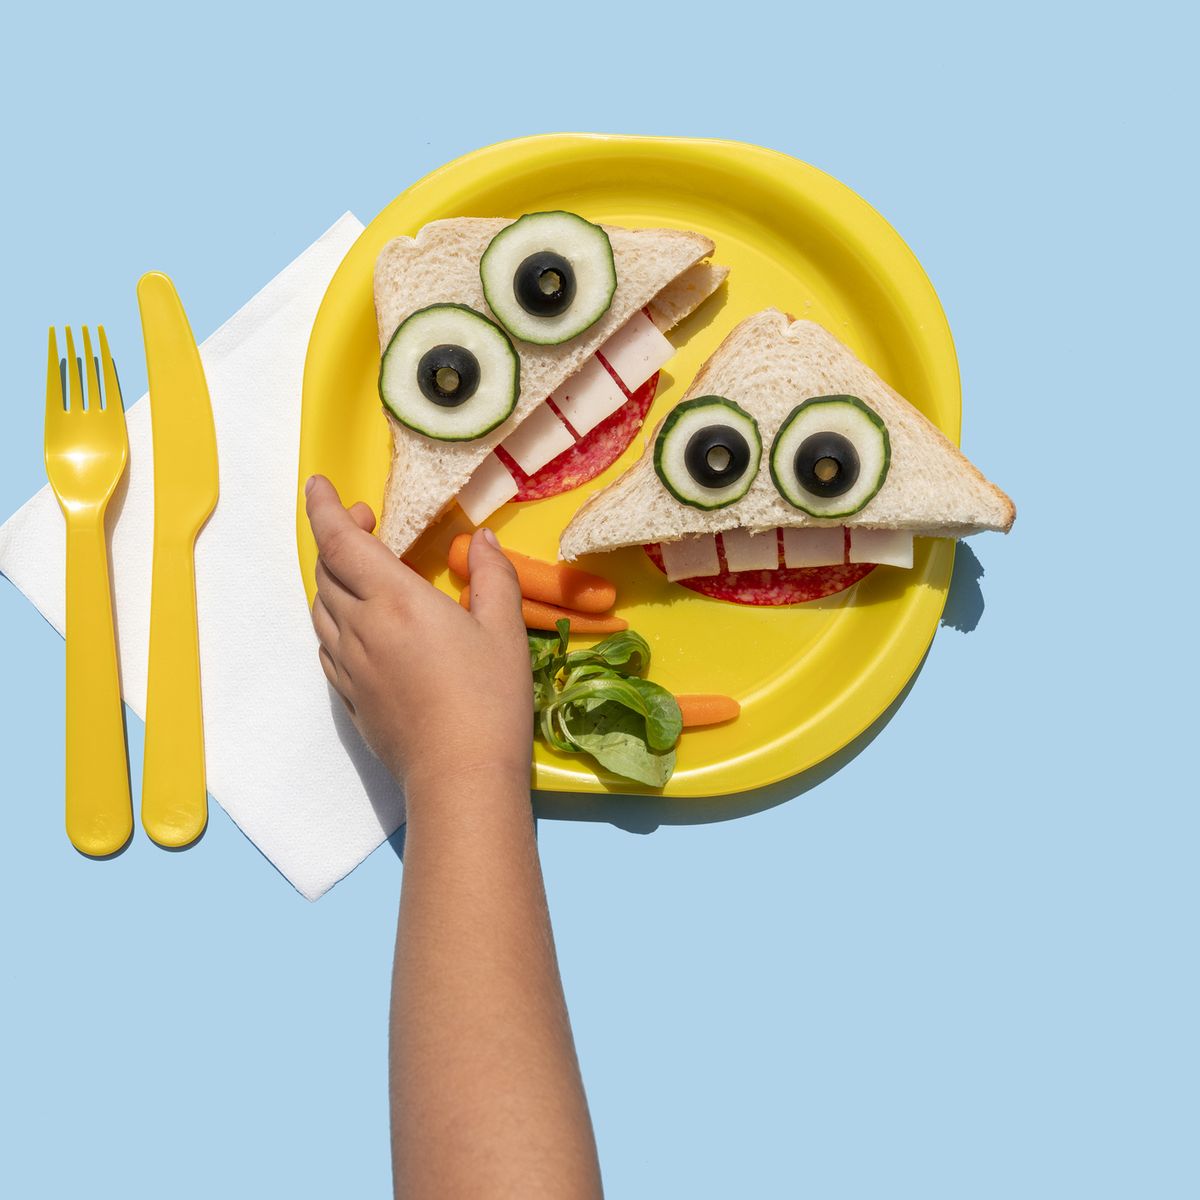 https://hips.hearstapps.com/hmg-prod/images/hand-of-baby-girl-picking-up-funny-looking-sandwich-royalty-free-image-1654027736.jpg?crop=0.66698xw:1xh;center,top&resize=1200:*